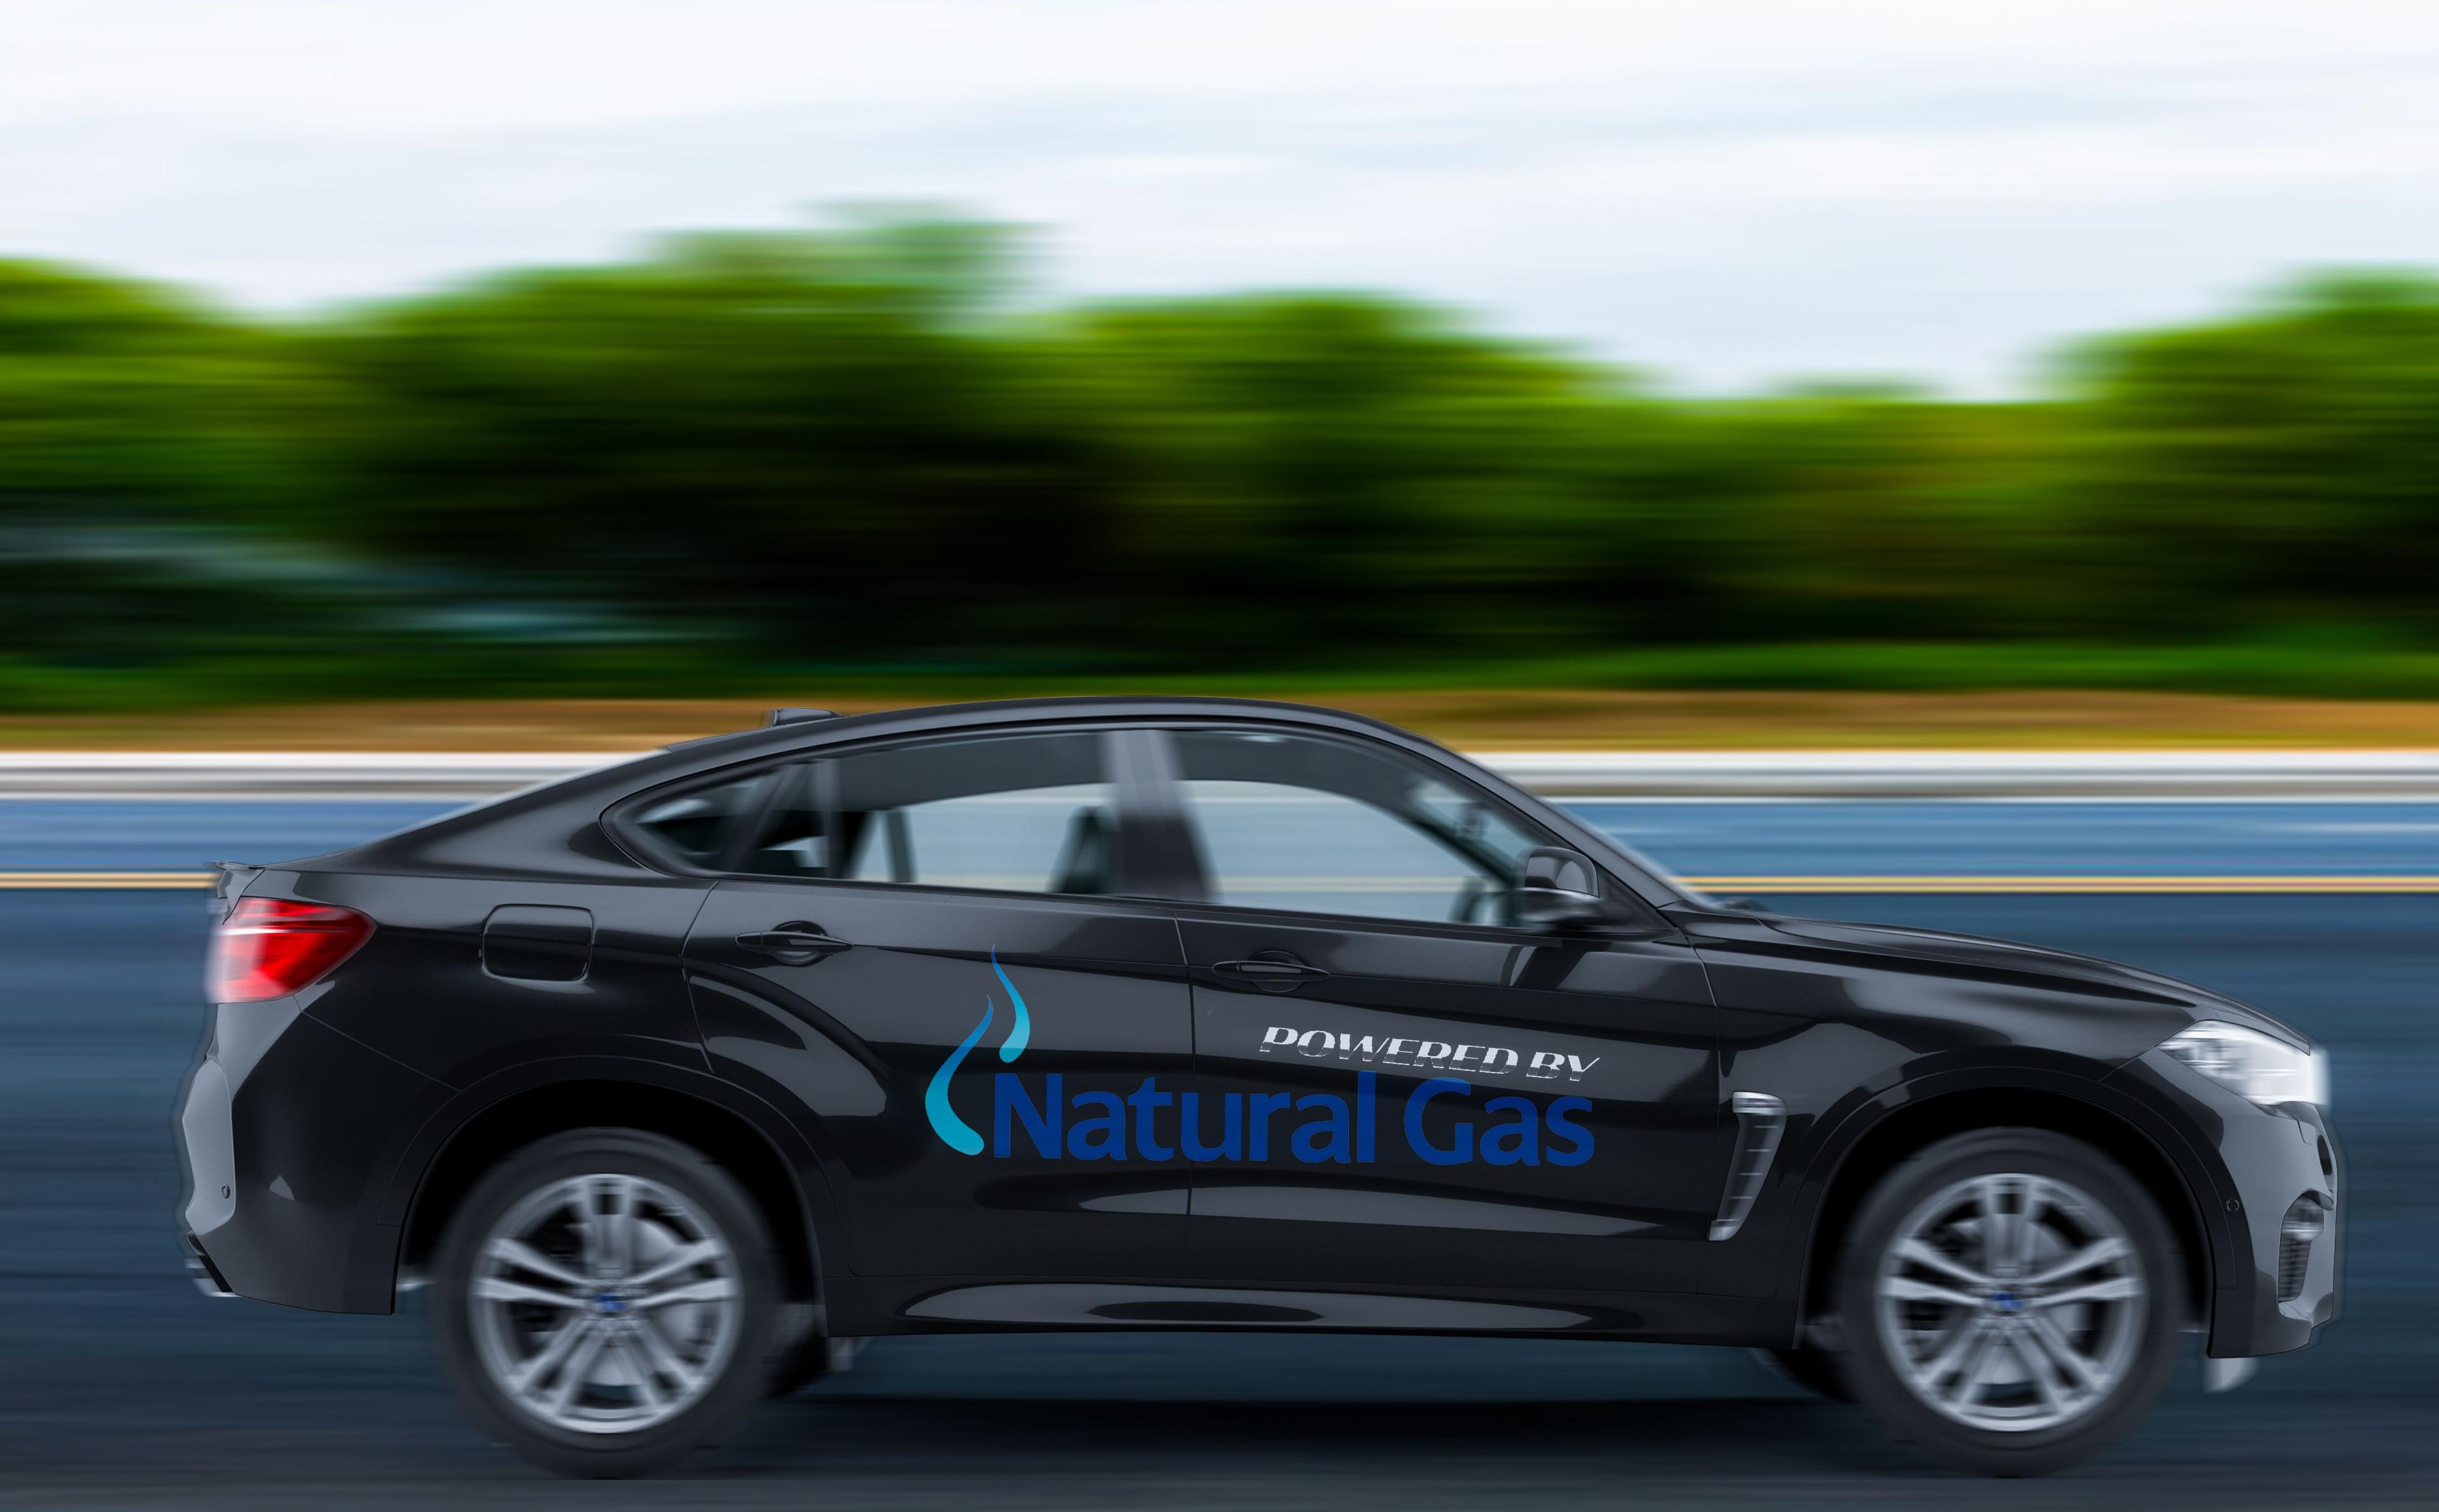 Natural gas-fueled four-wheelers are popping up across Africa 🚗